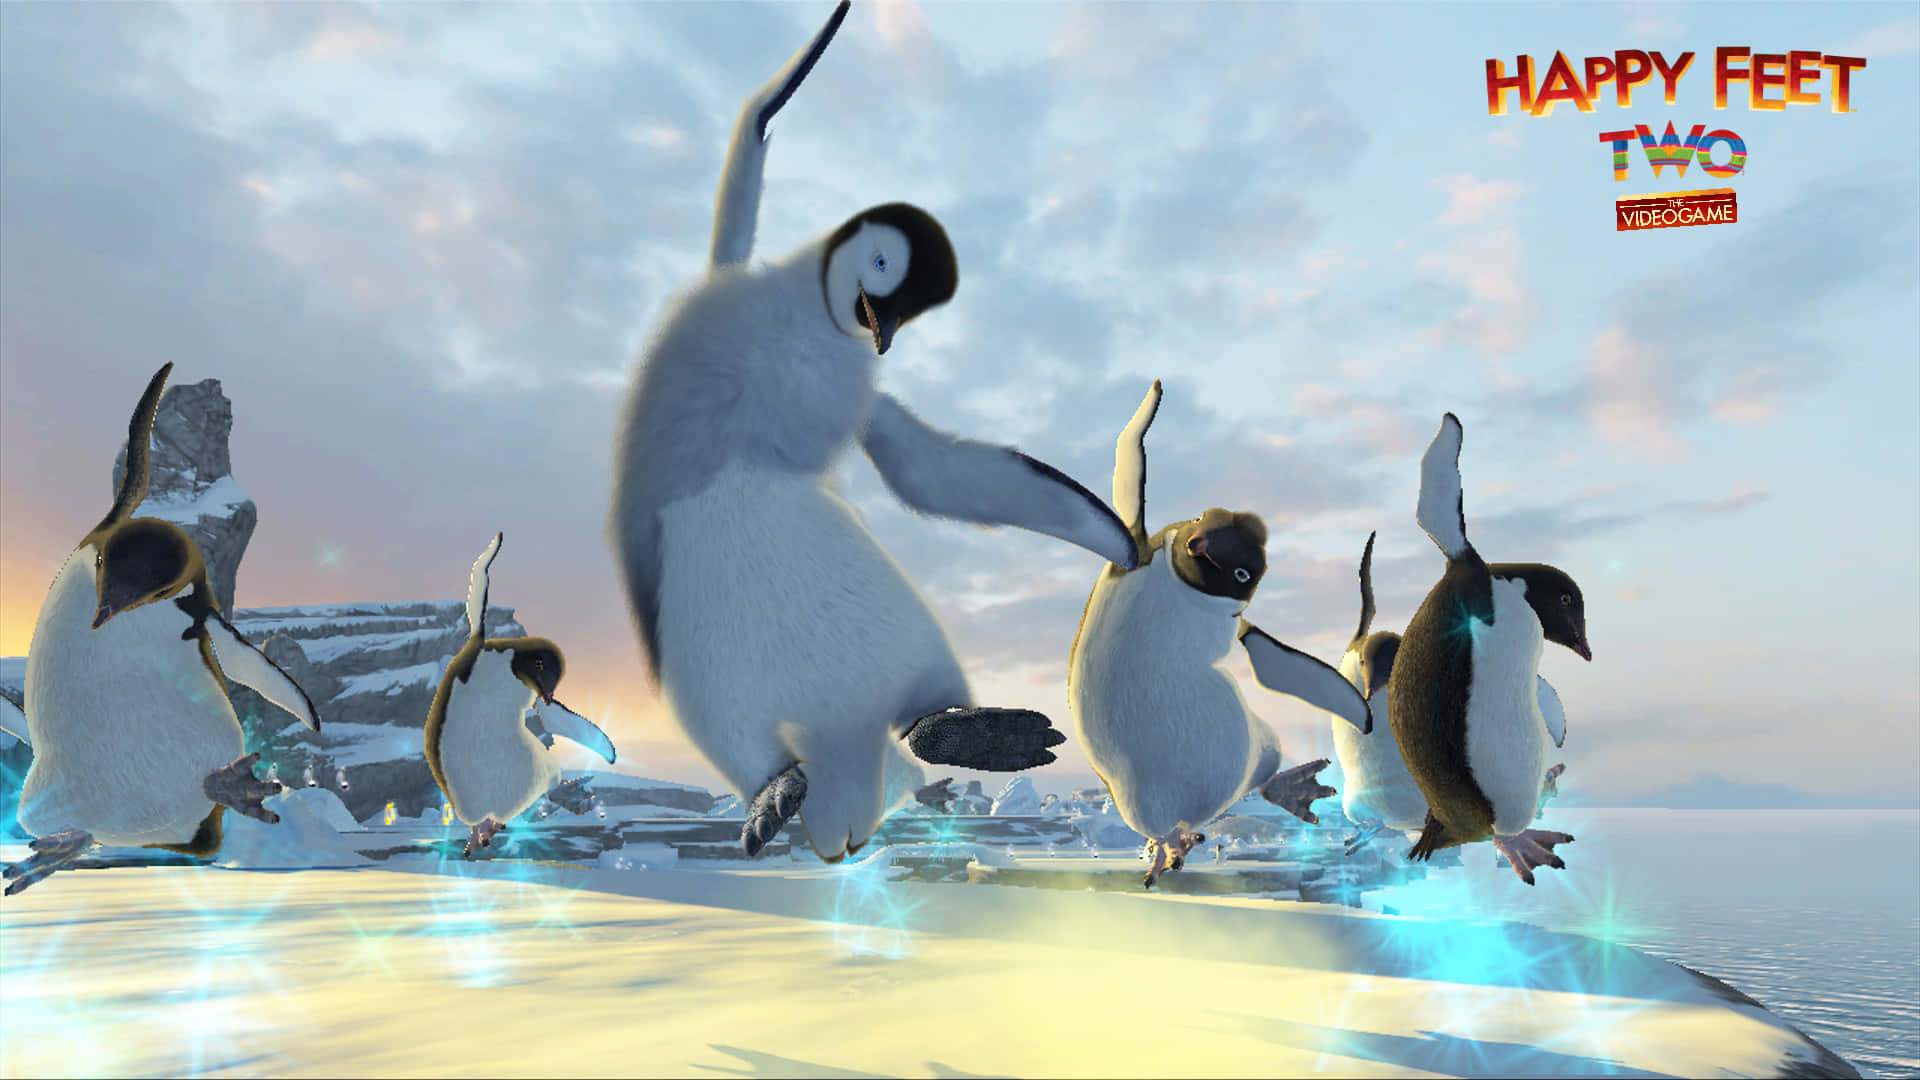 Dancing Penguins From Happy Feet Two Wallpaper